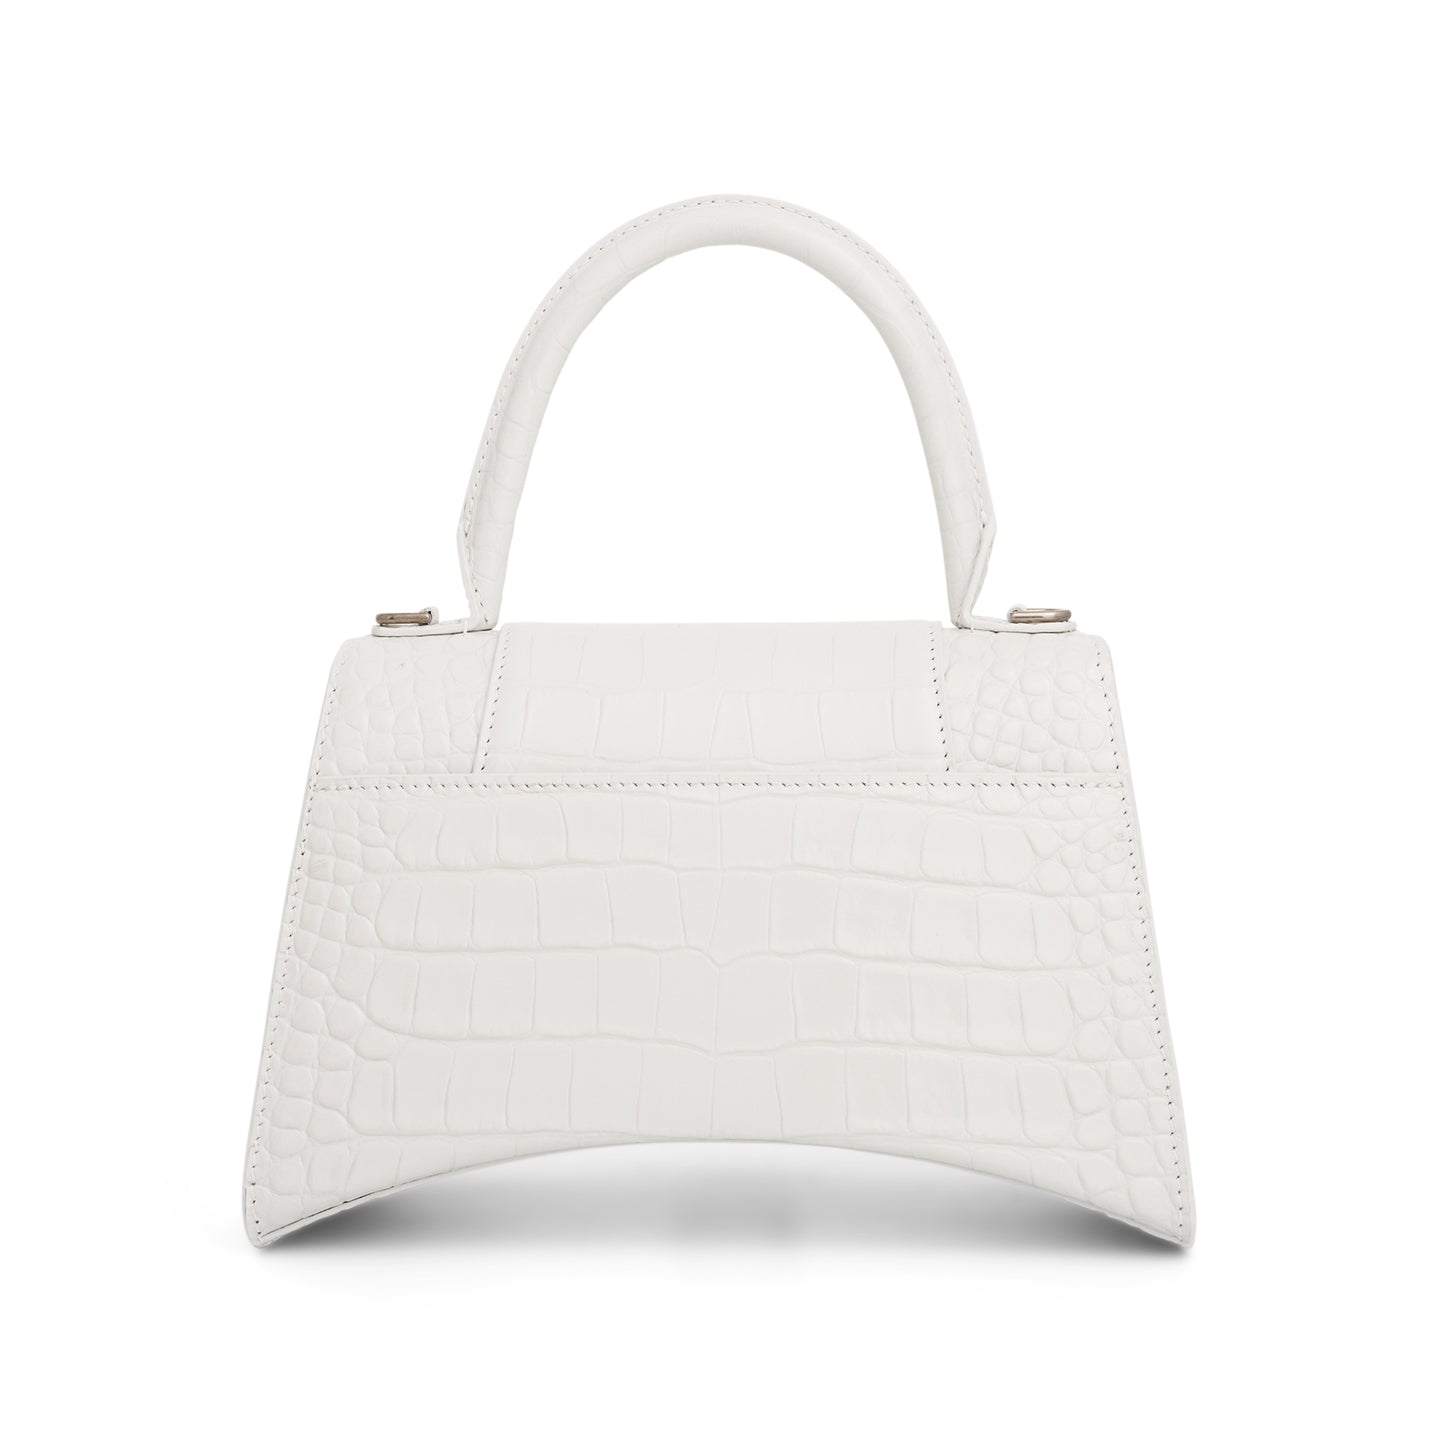 Hourglass Small Croco Embossed Bag in White